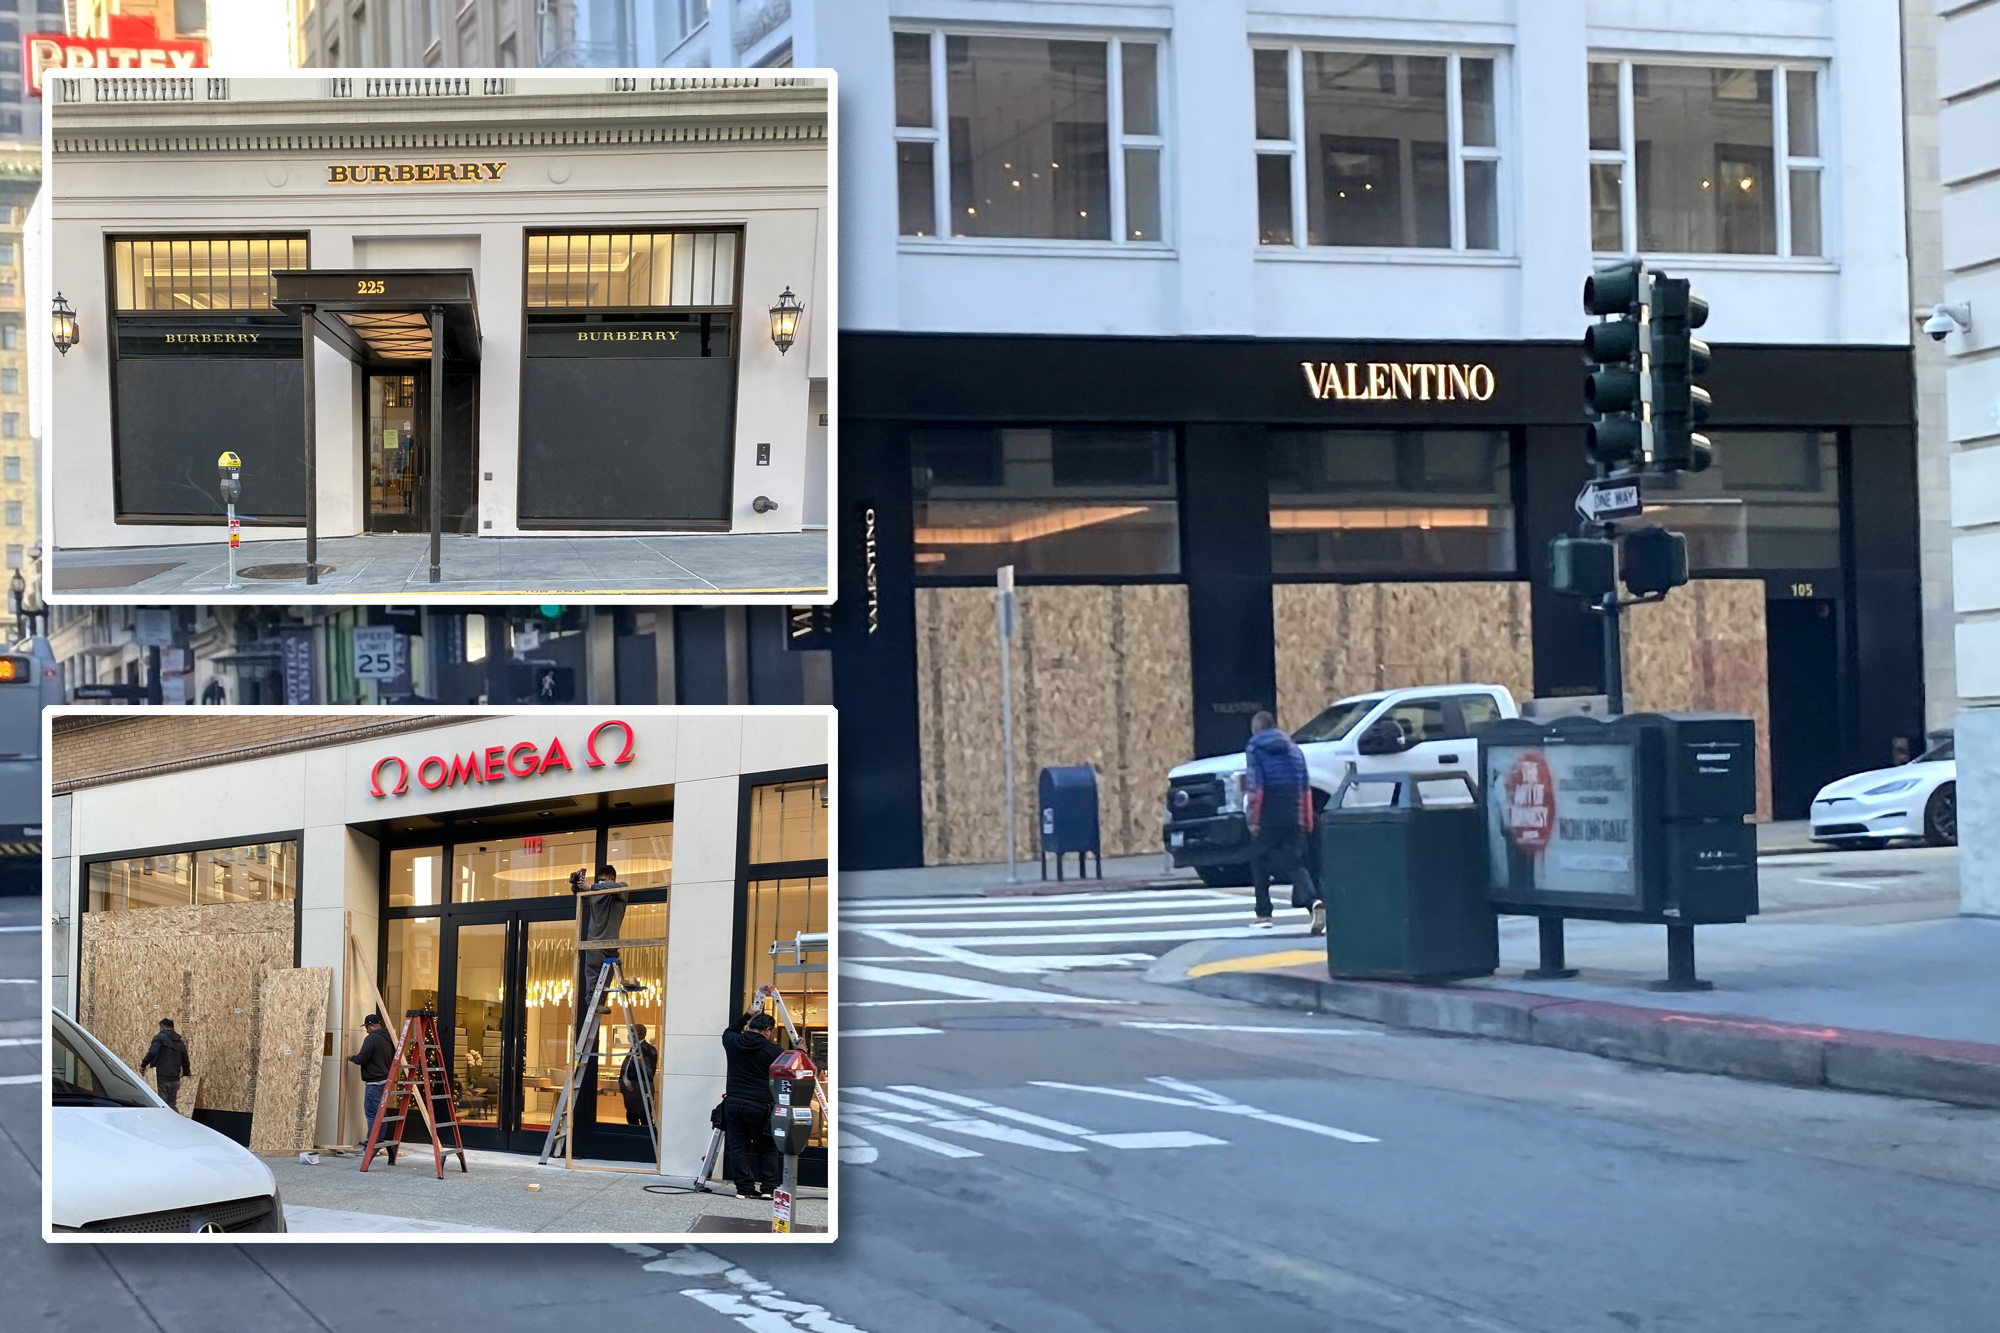 How looting turned the most upscale segment of San Francisco into a ghost town